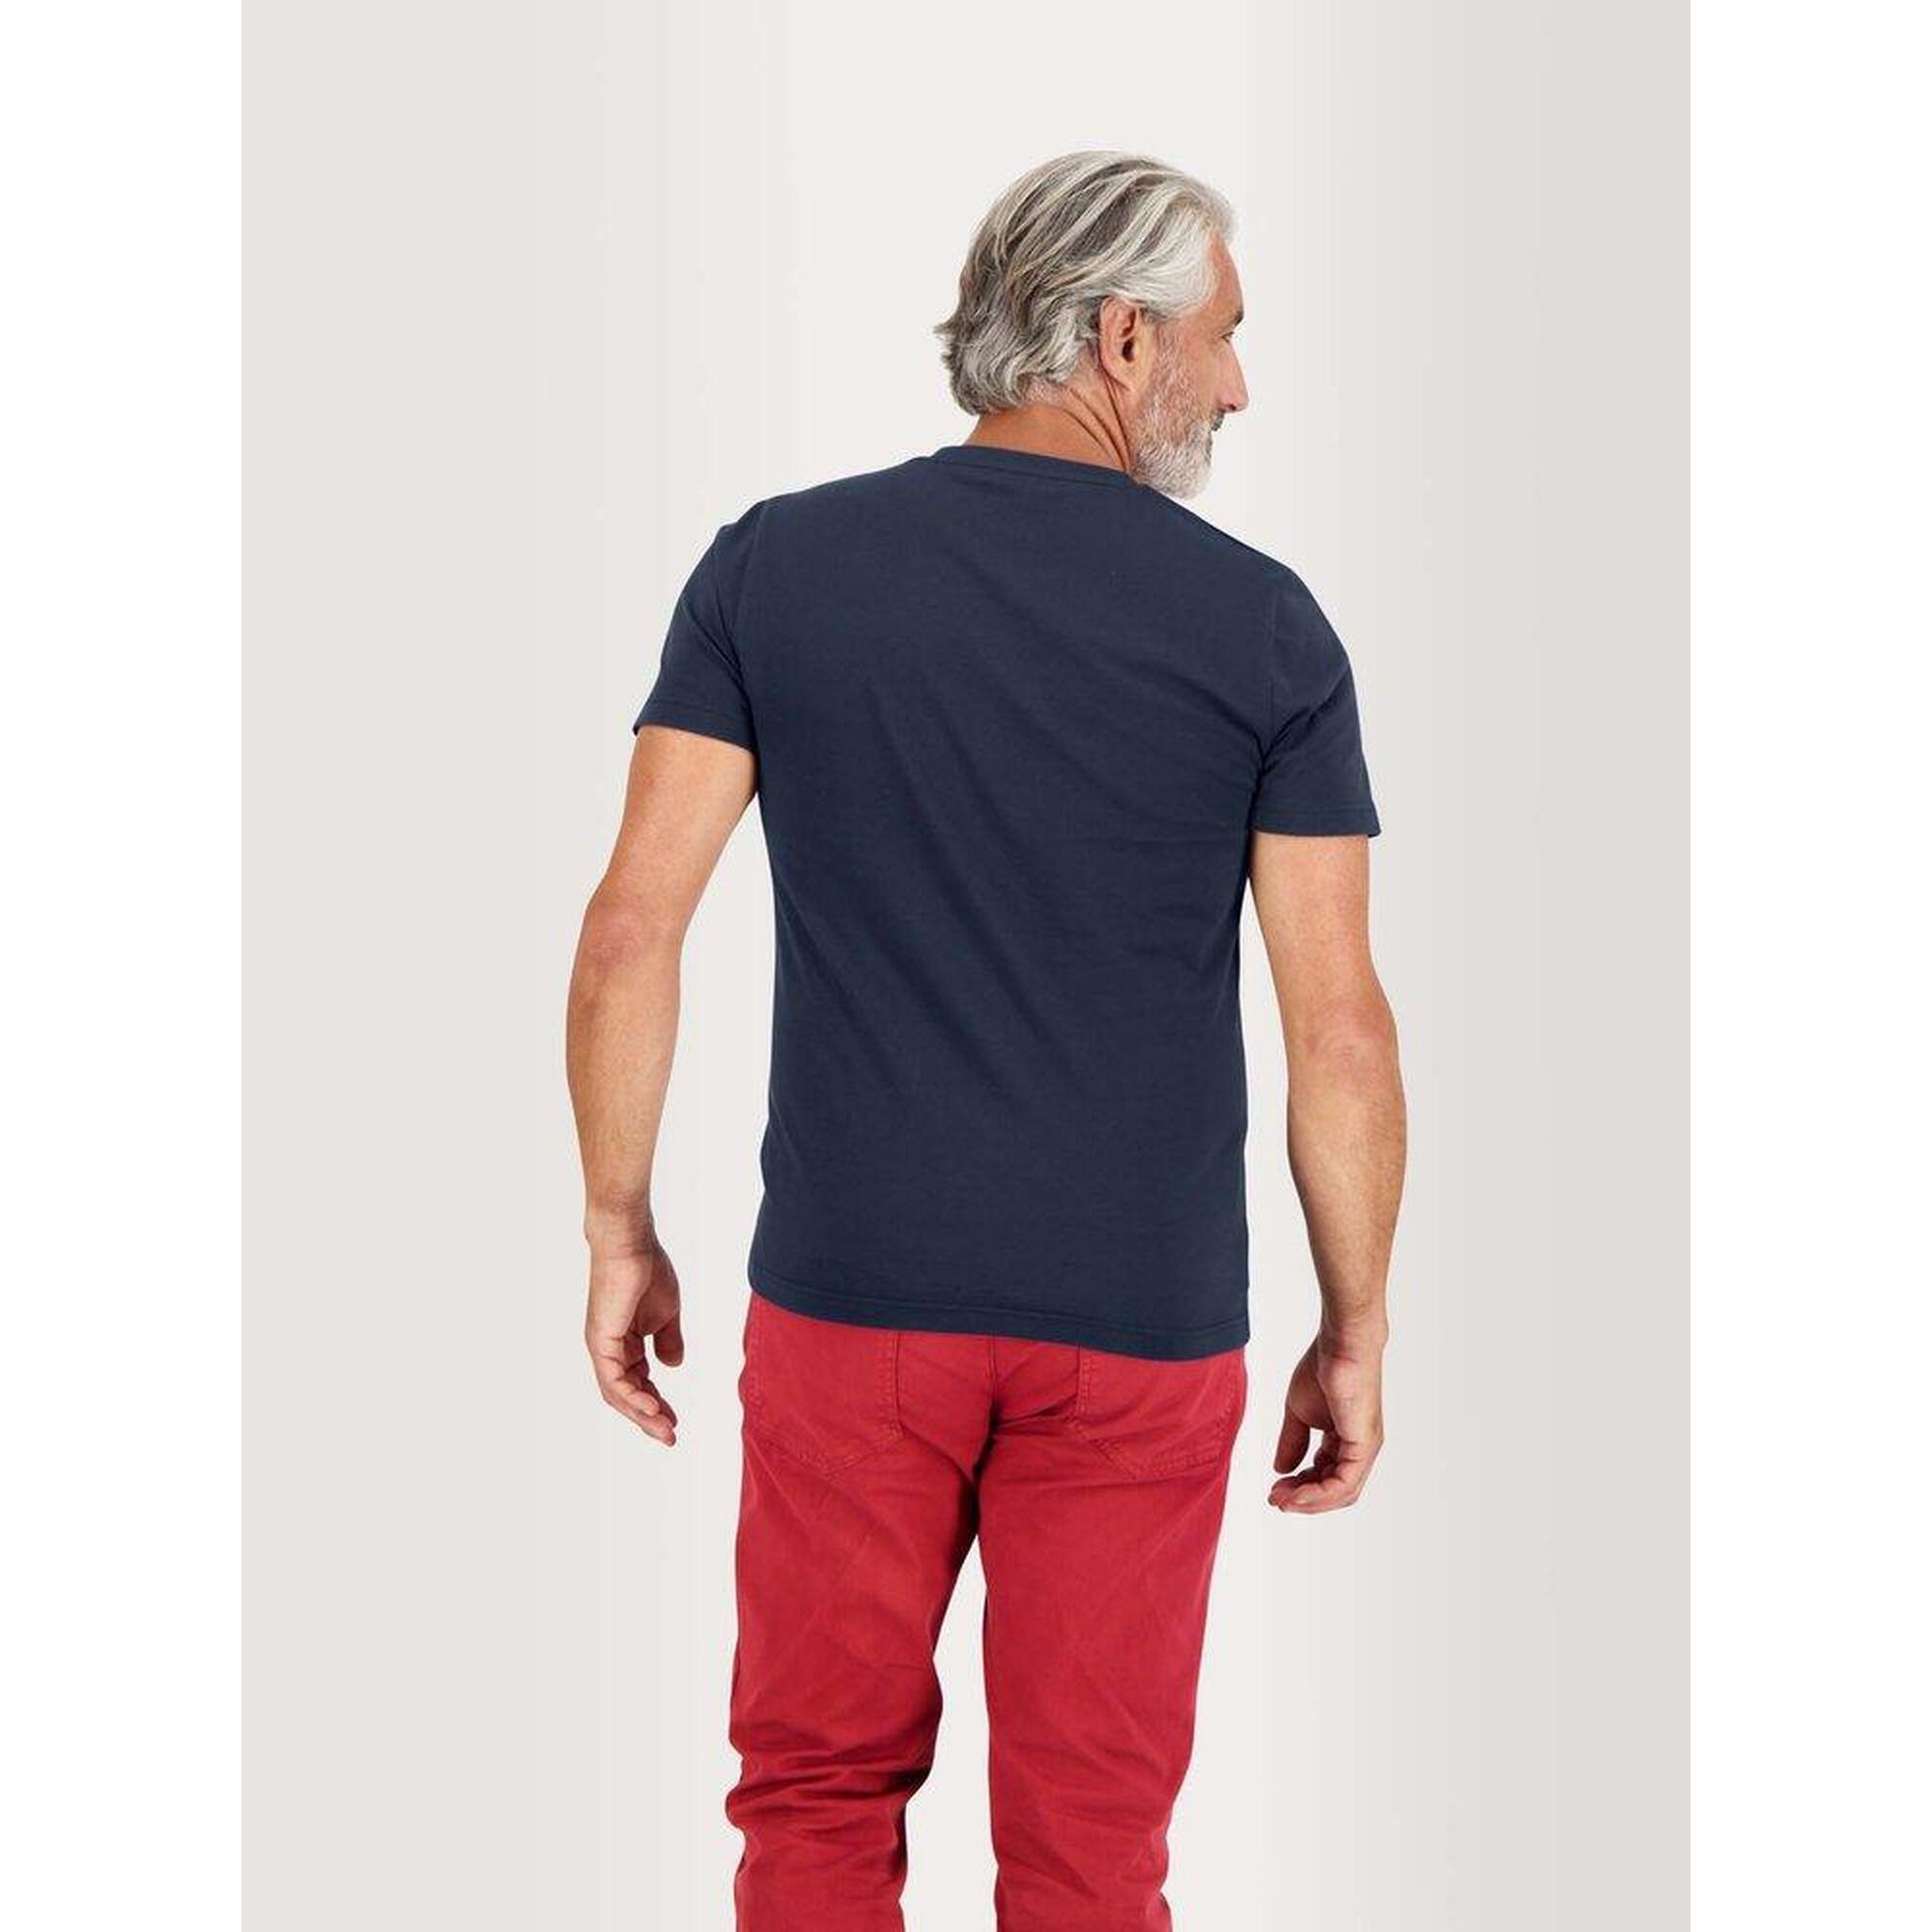 T-shirt manches courtes Homme - AMORITEE Navy